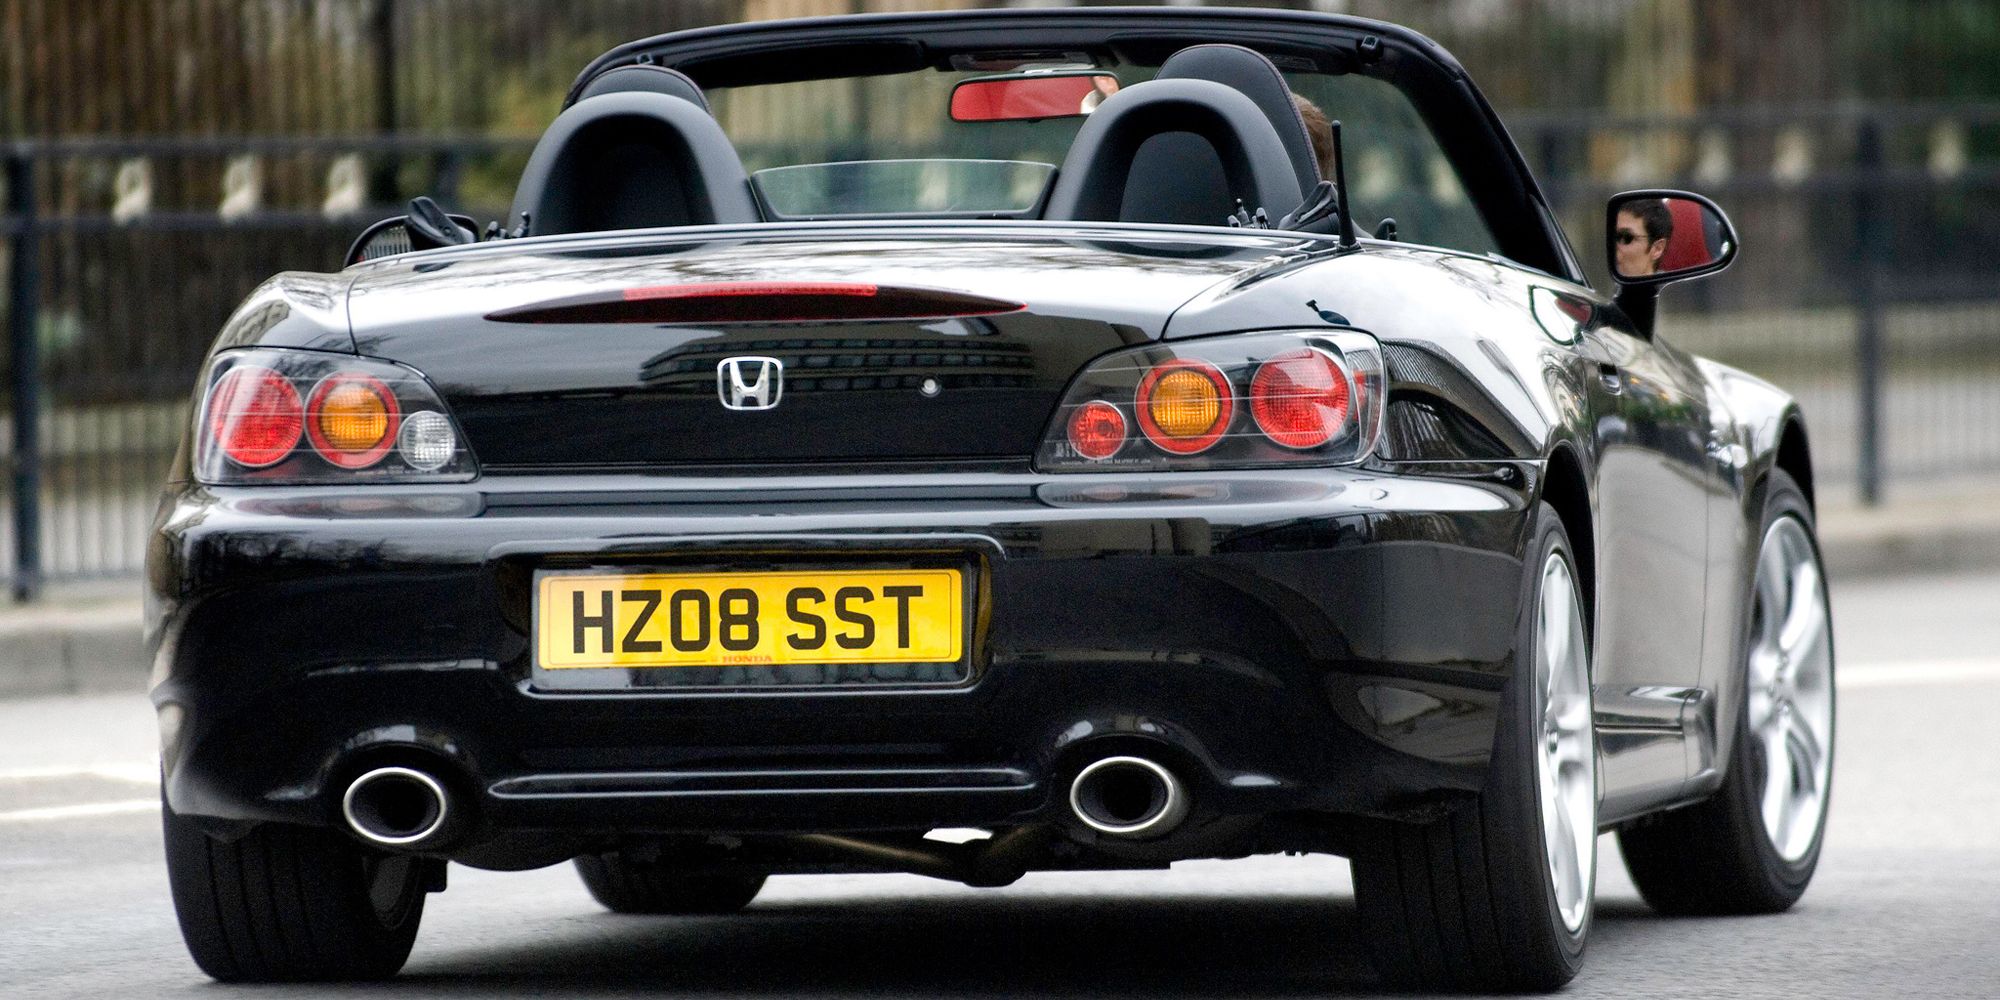 The rear of a black S2000